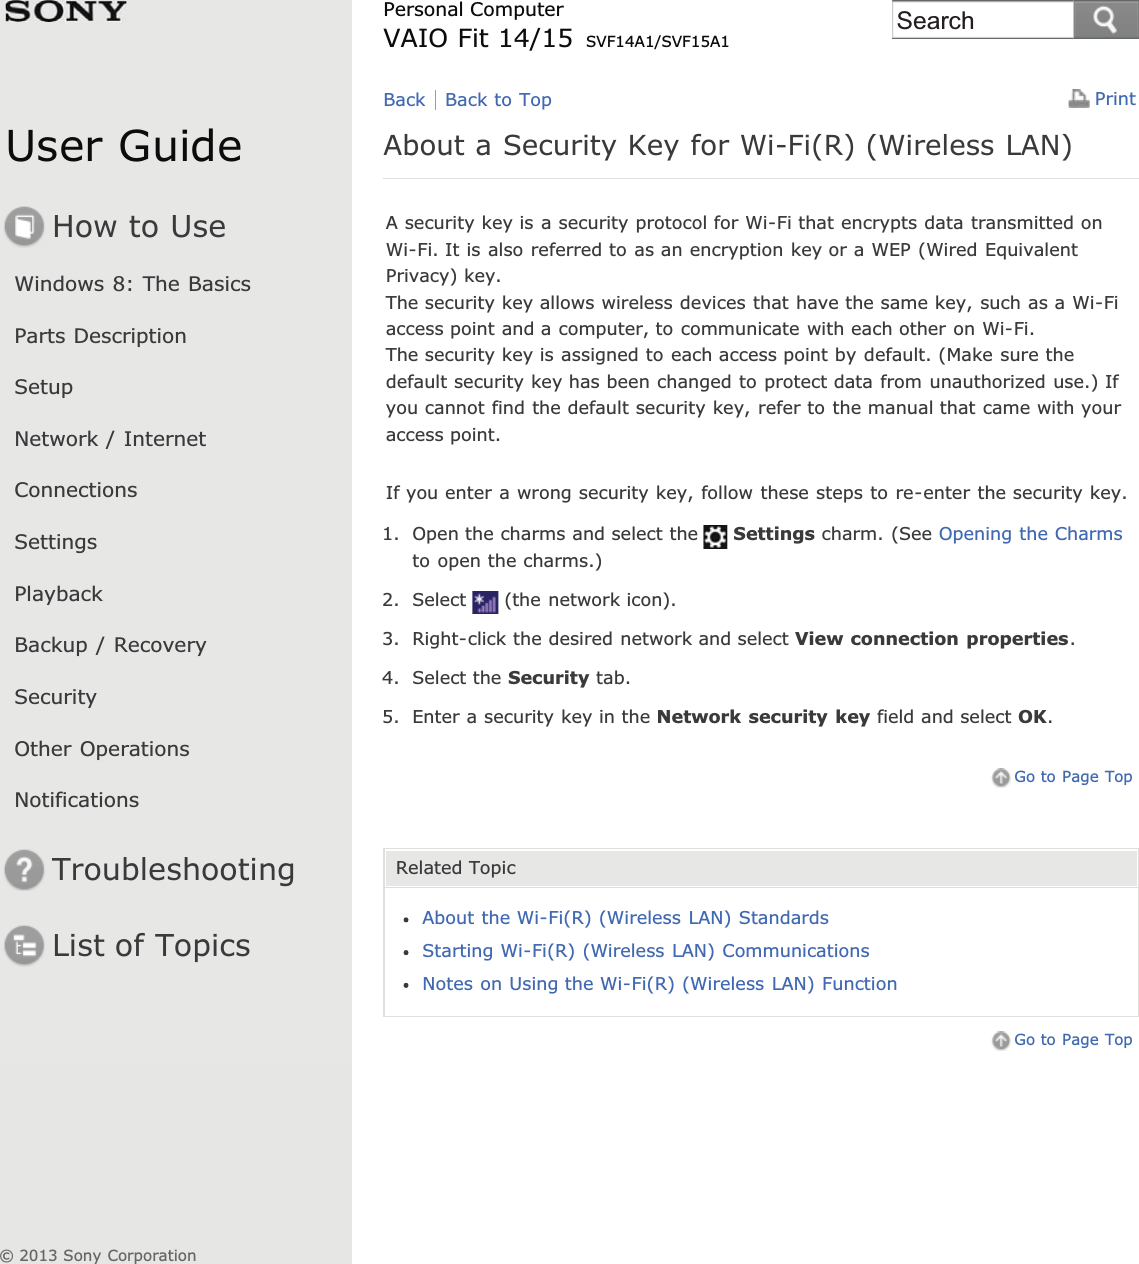 User GuideHow to UseWindows 8: The BasicsParts DescriptionSetupNetwork / InternetConnectionsSettingsPlaybackBackup / RecoverySecurityOther OperationsNotificationsTroubleshootingList of TopicsPrintPersonal ComputerVAIO Fit 14/15 SVF14A1/SVF15A1About a Security Key for Wi-Fi(R) (Wireless LAN)A security key is a security protocol for Wi-Fi that encrypts data transmitted onWi-Fi. It is also referred to as an encryption key or a WEP (Wired EquivalentPrivacy) key.The security key allows wireless devices that have the same key, such as a Wi-Fiaccess point and a computer, to communicate with each other on Wi-Fi.The security key is assigned to each access point by default. (Make sure thedefault security key has been changed to protect data from unauthorized use.) Ifyou cannot find the default security key, refer to the manual that came with youraccess point.If you enter a wrong security key, follow these steps to re-enter the security key.1. Open the charms and select the Settings charm. (See Opening the Charmsto open the charms.)2. Select (the network icon).3. Right-click the desired network and select View connection properties.4. Select the Security tab.5. Enter a security key in the Network security key field and select OK.Go to Page TopRelated TopicAbout the Wi-Fi(R) (Wireless LAN) StandardsStarting Wi-Fi(R) (Wireless LAN) CommunicationsNotes on Using the Wi-Fi(R) (Wireless LAN) FunctionGo to Page TopBack Back to Top© 2013 Sony CorporationSearch